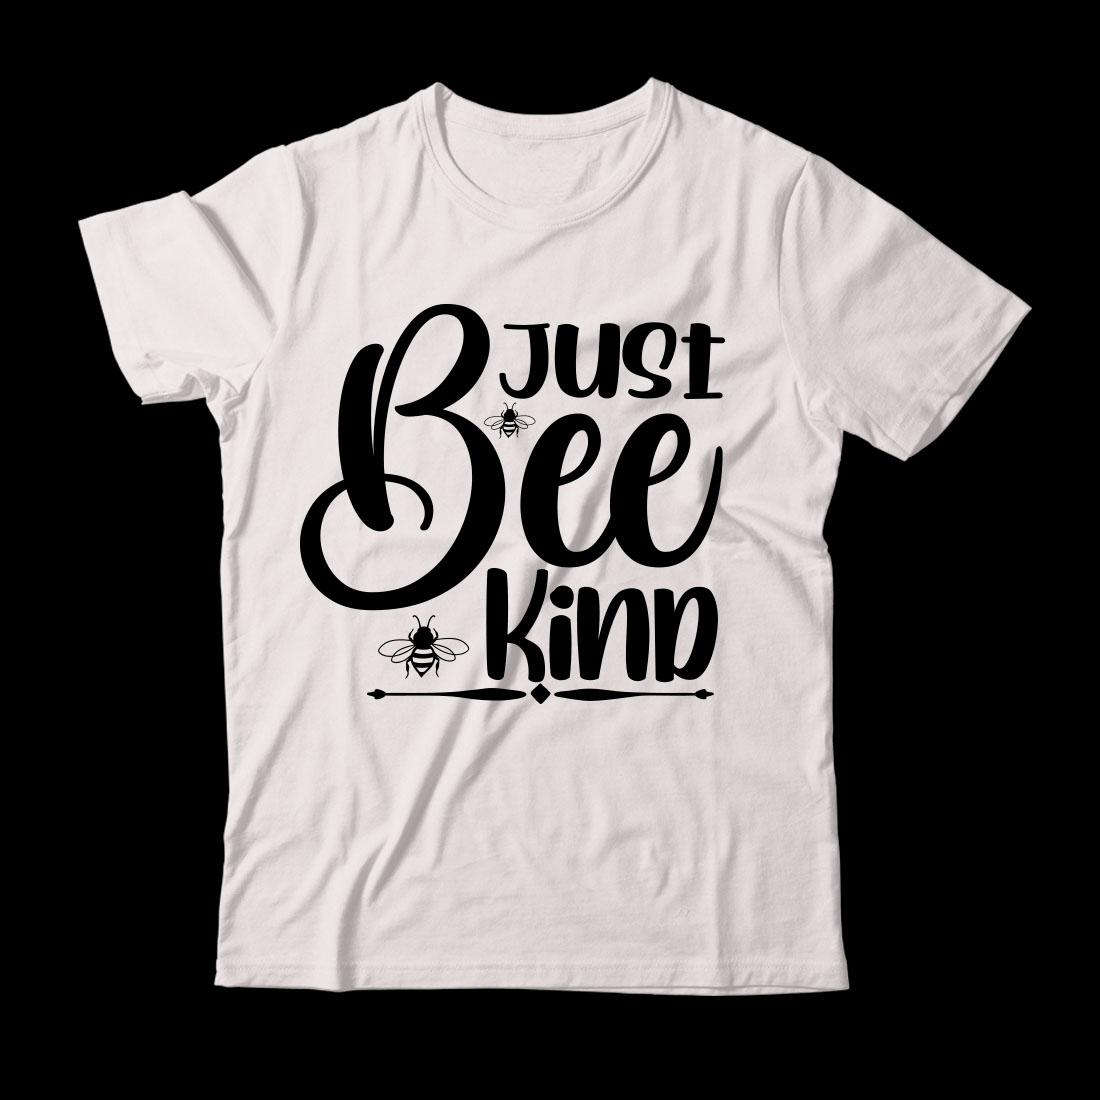 White t - shirt that says just bee kind.